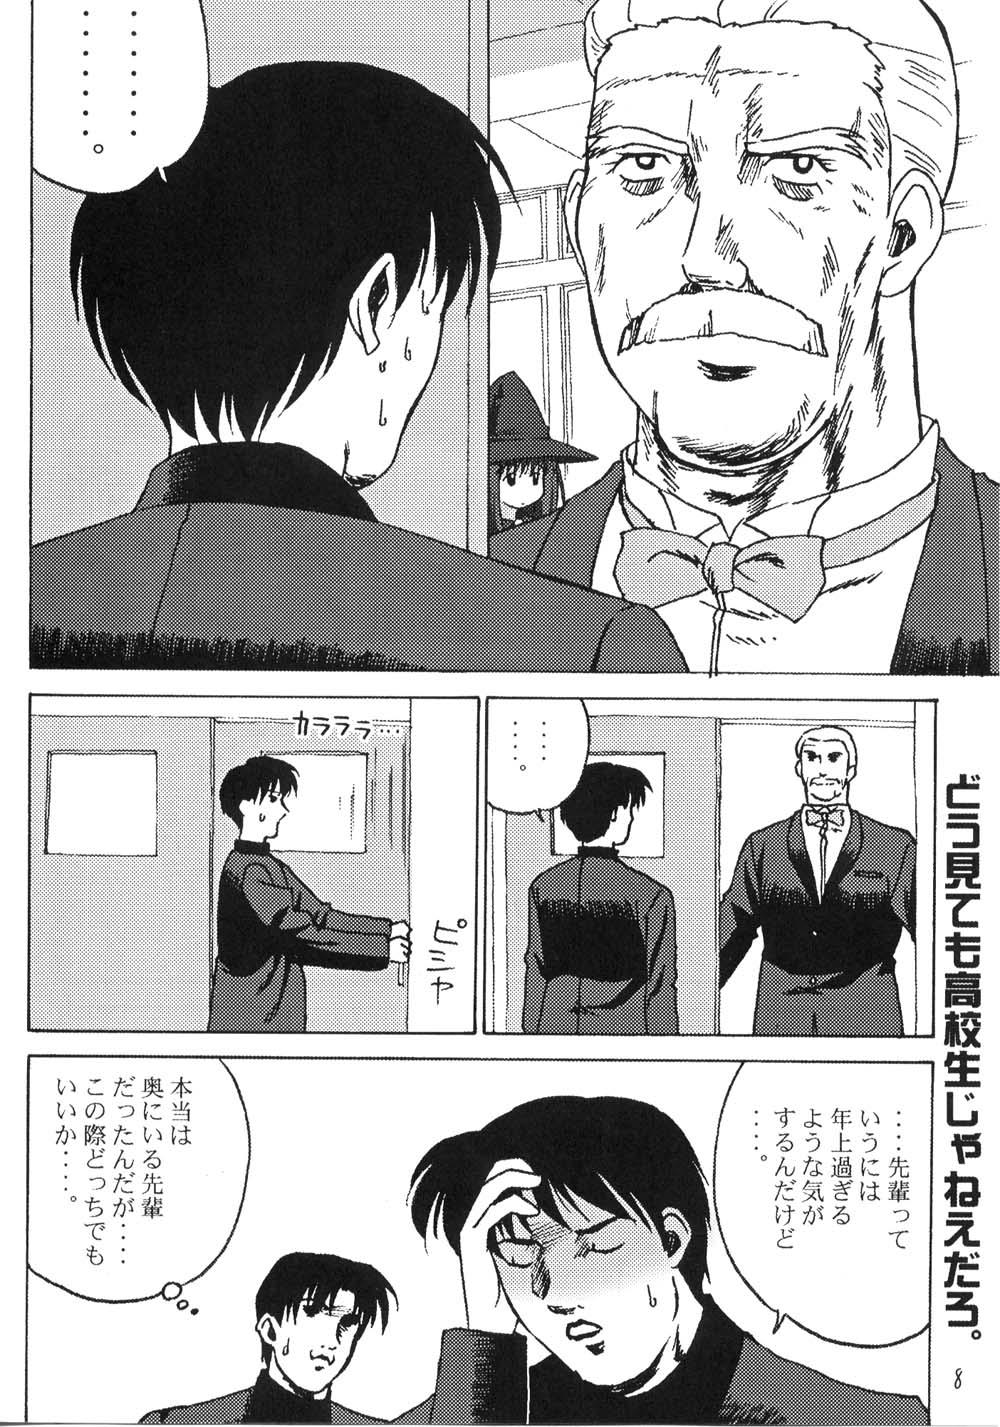 Jap Credit Note Vol. 5 - To heart Comic party Kizuato Teenfuns - Page 7